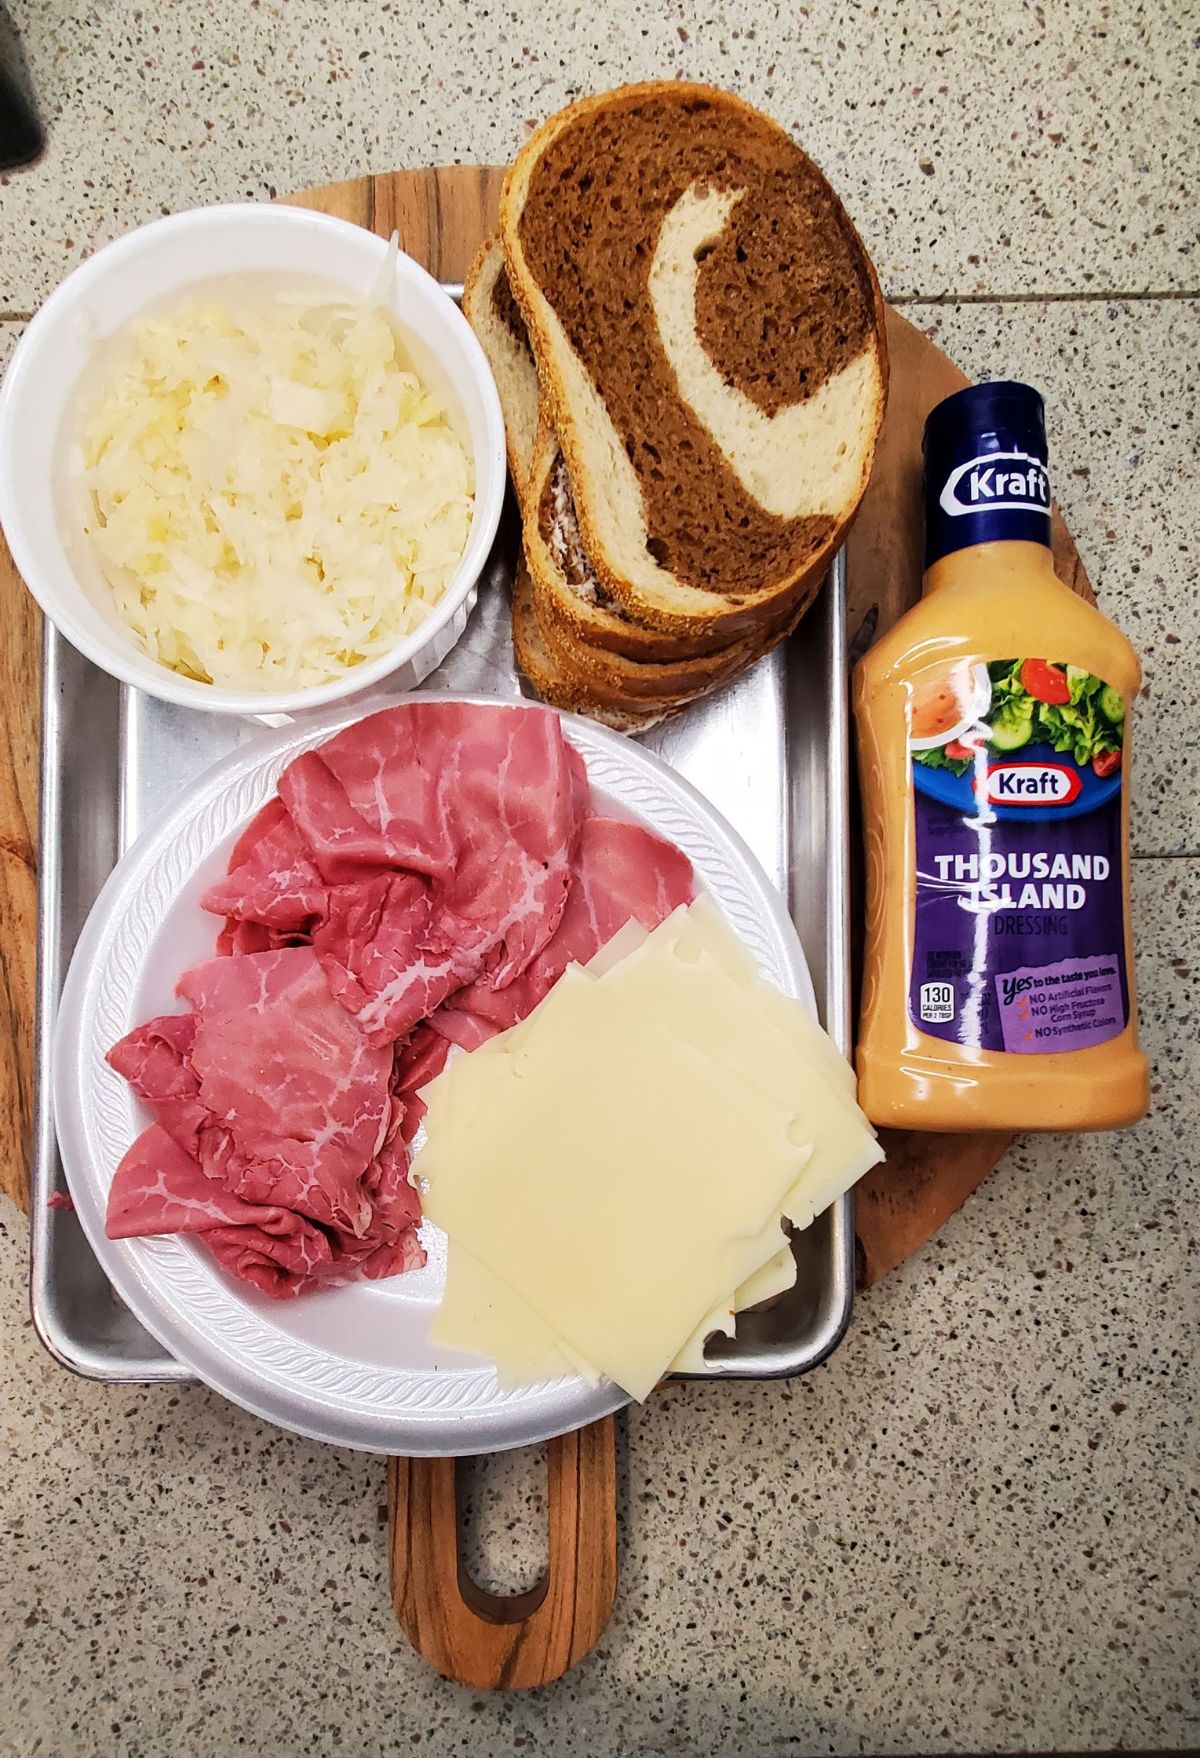 A plate with bread, meat, onions, and 1000 island dressing.